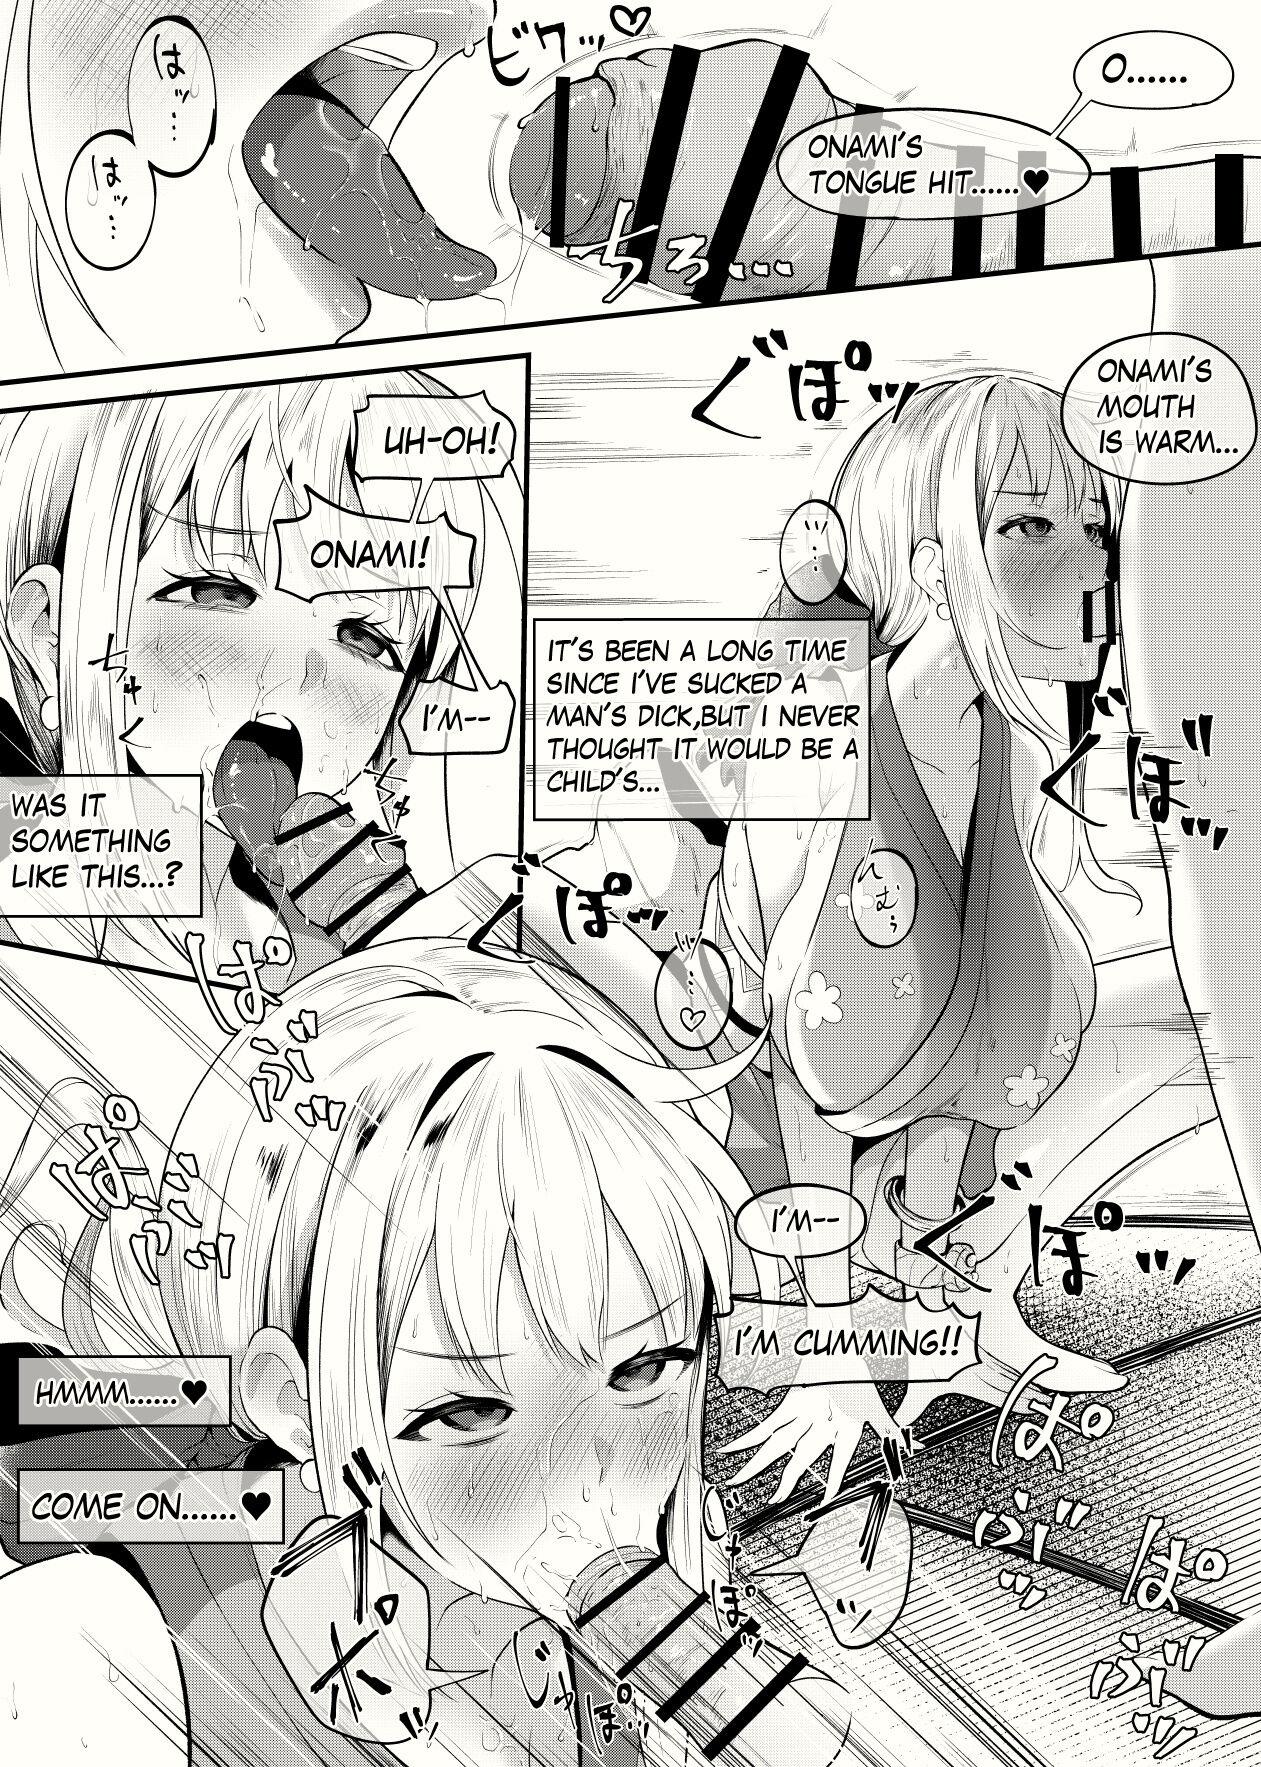 Pussyfucking Nami Request Manga - One piece Spain - Page 11